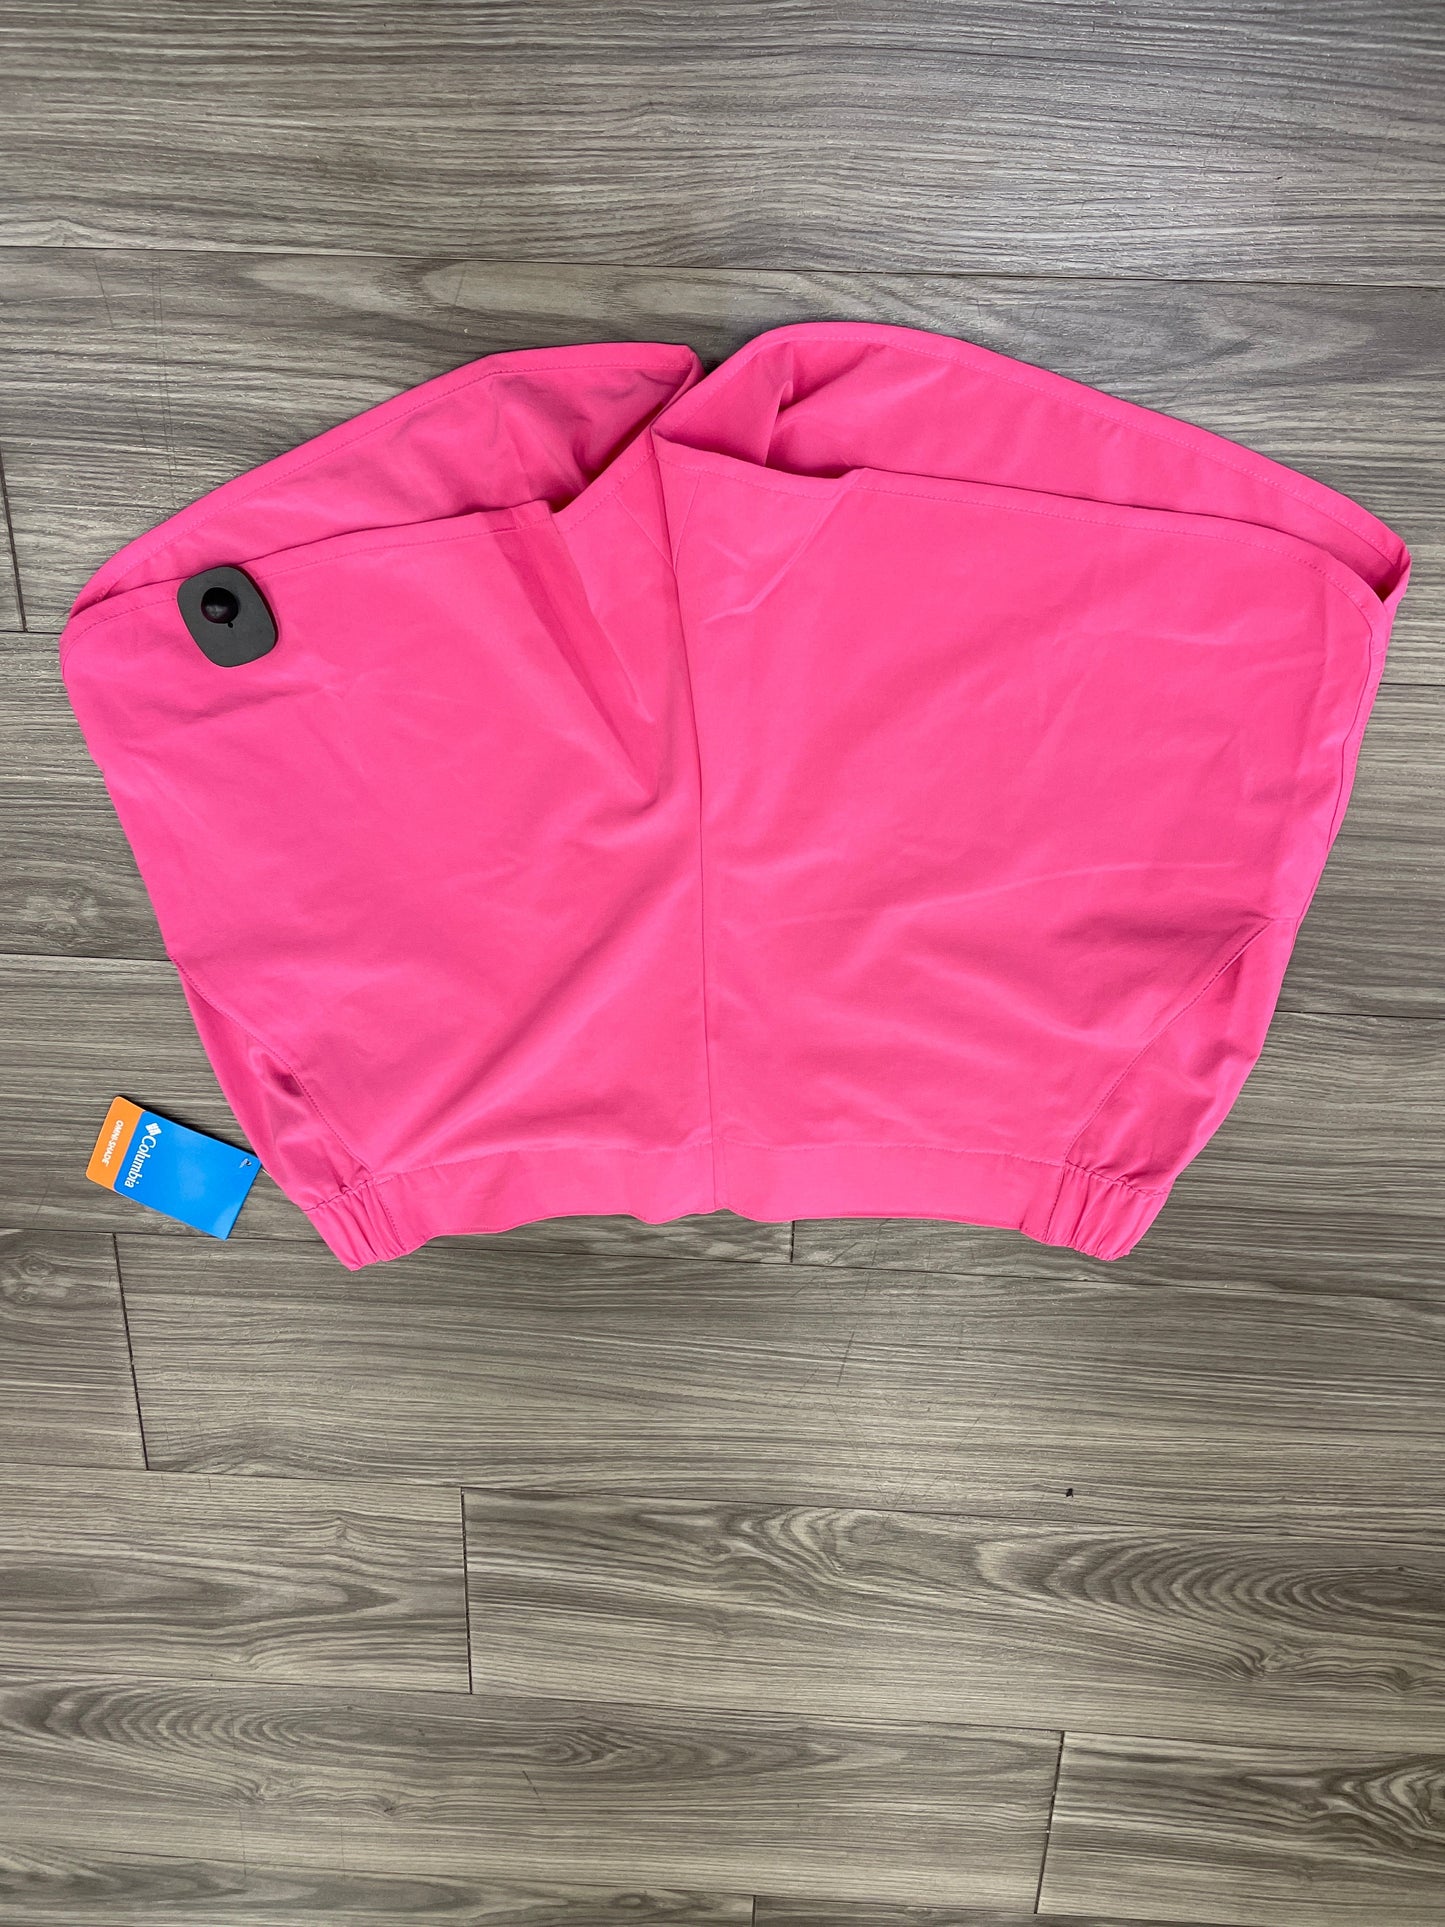 Pink Athletic Shorts Columbia, Size 1x